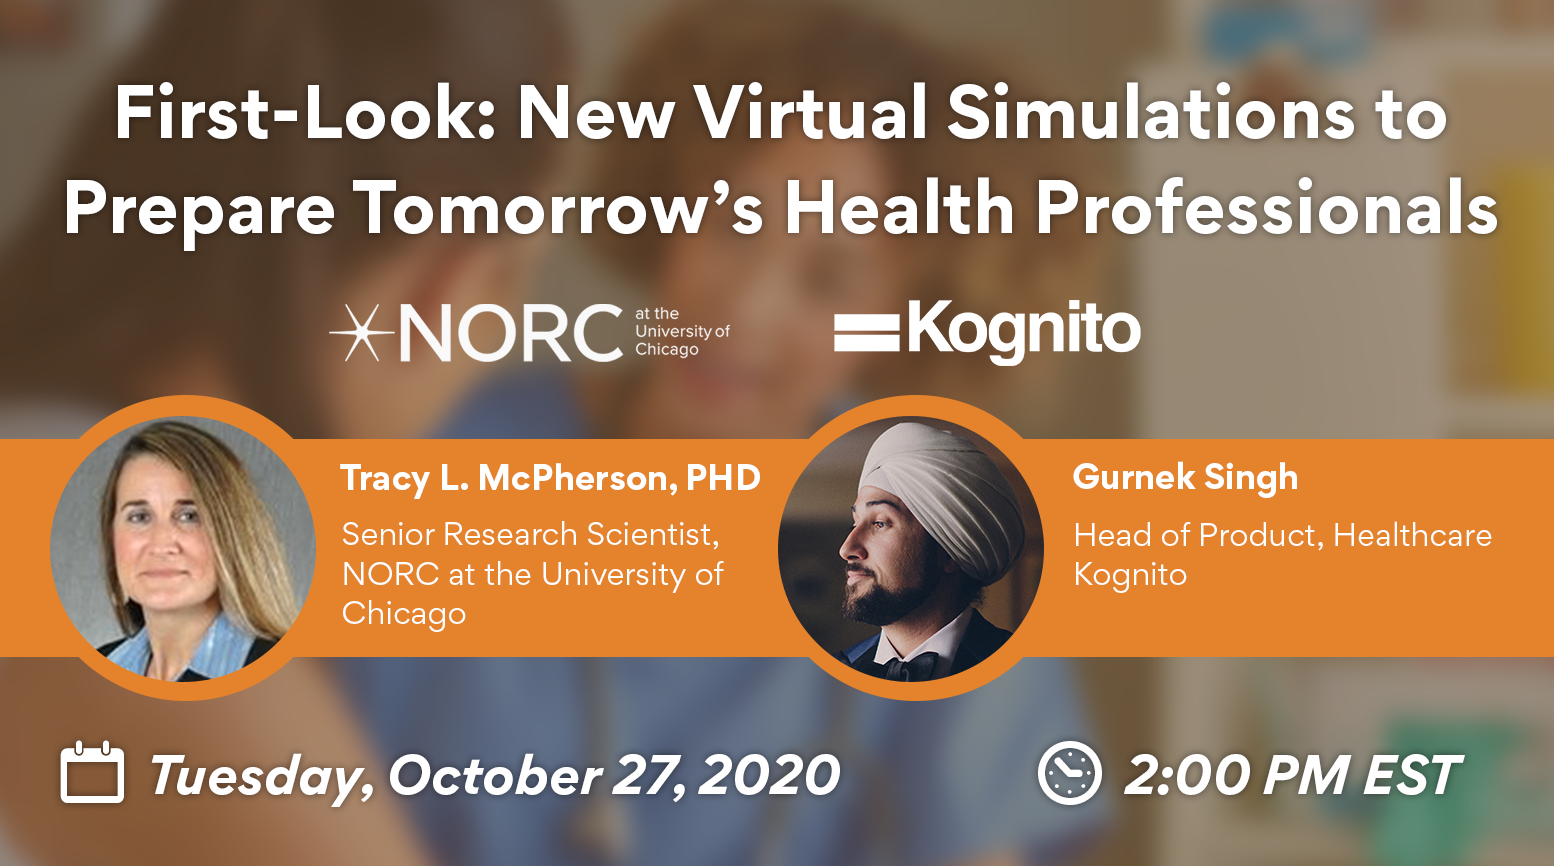 First-Look: New Virtual Simulations to Prepare Tomorrow’s Health Professionals